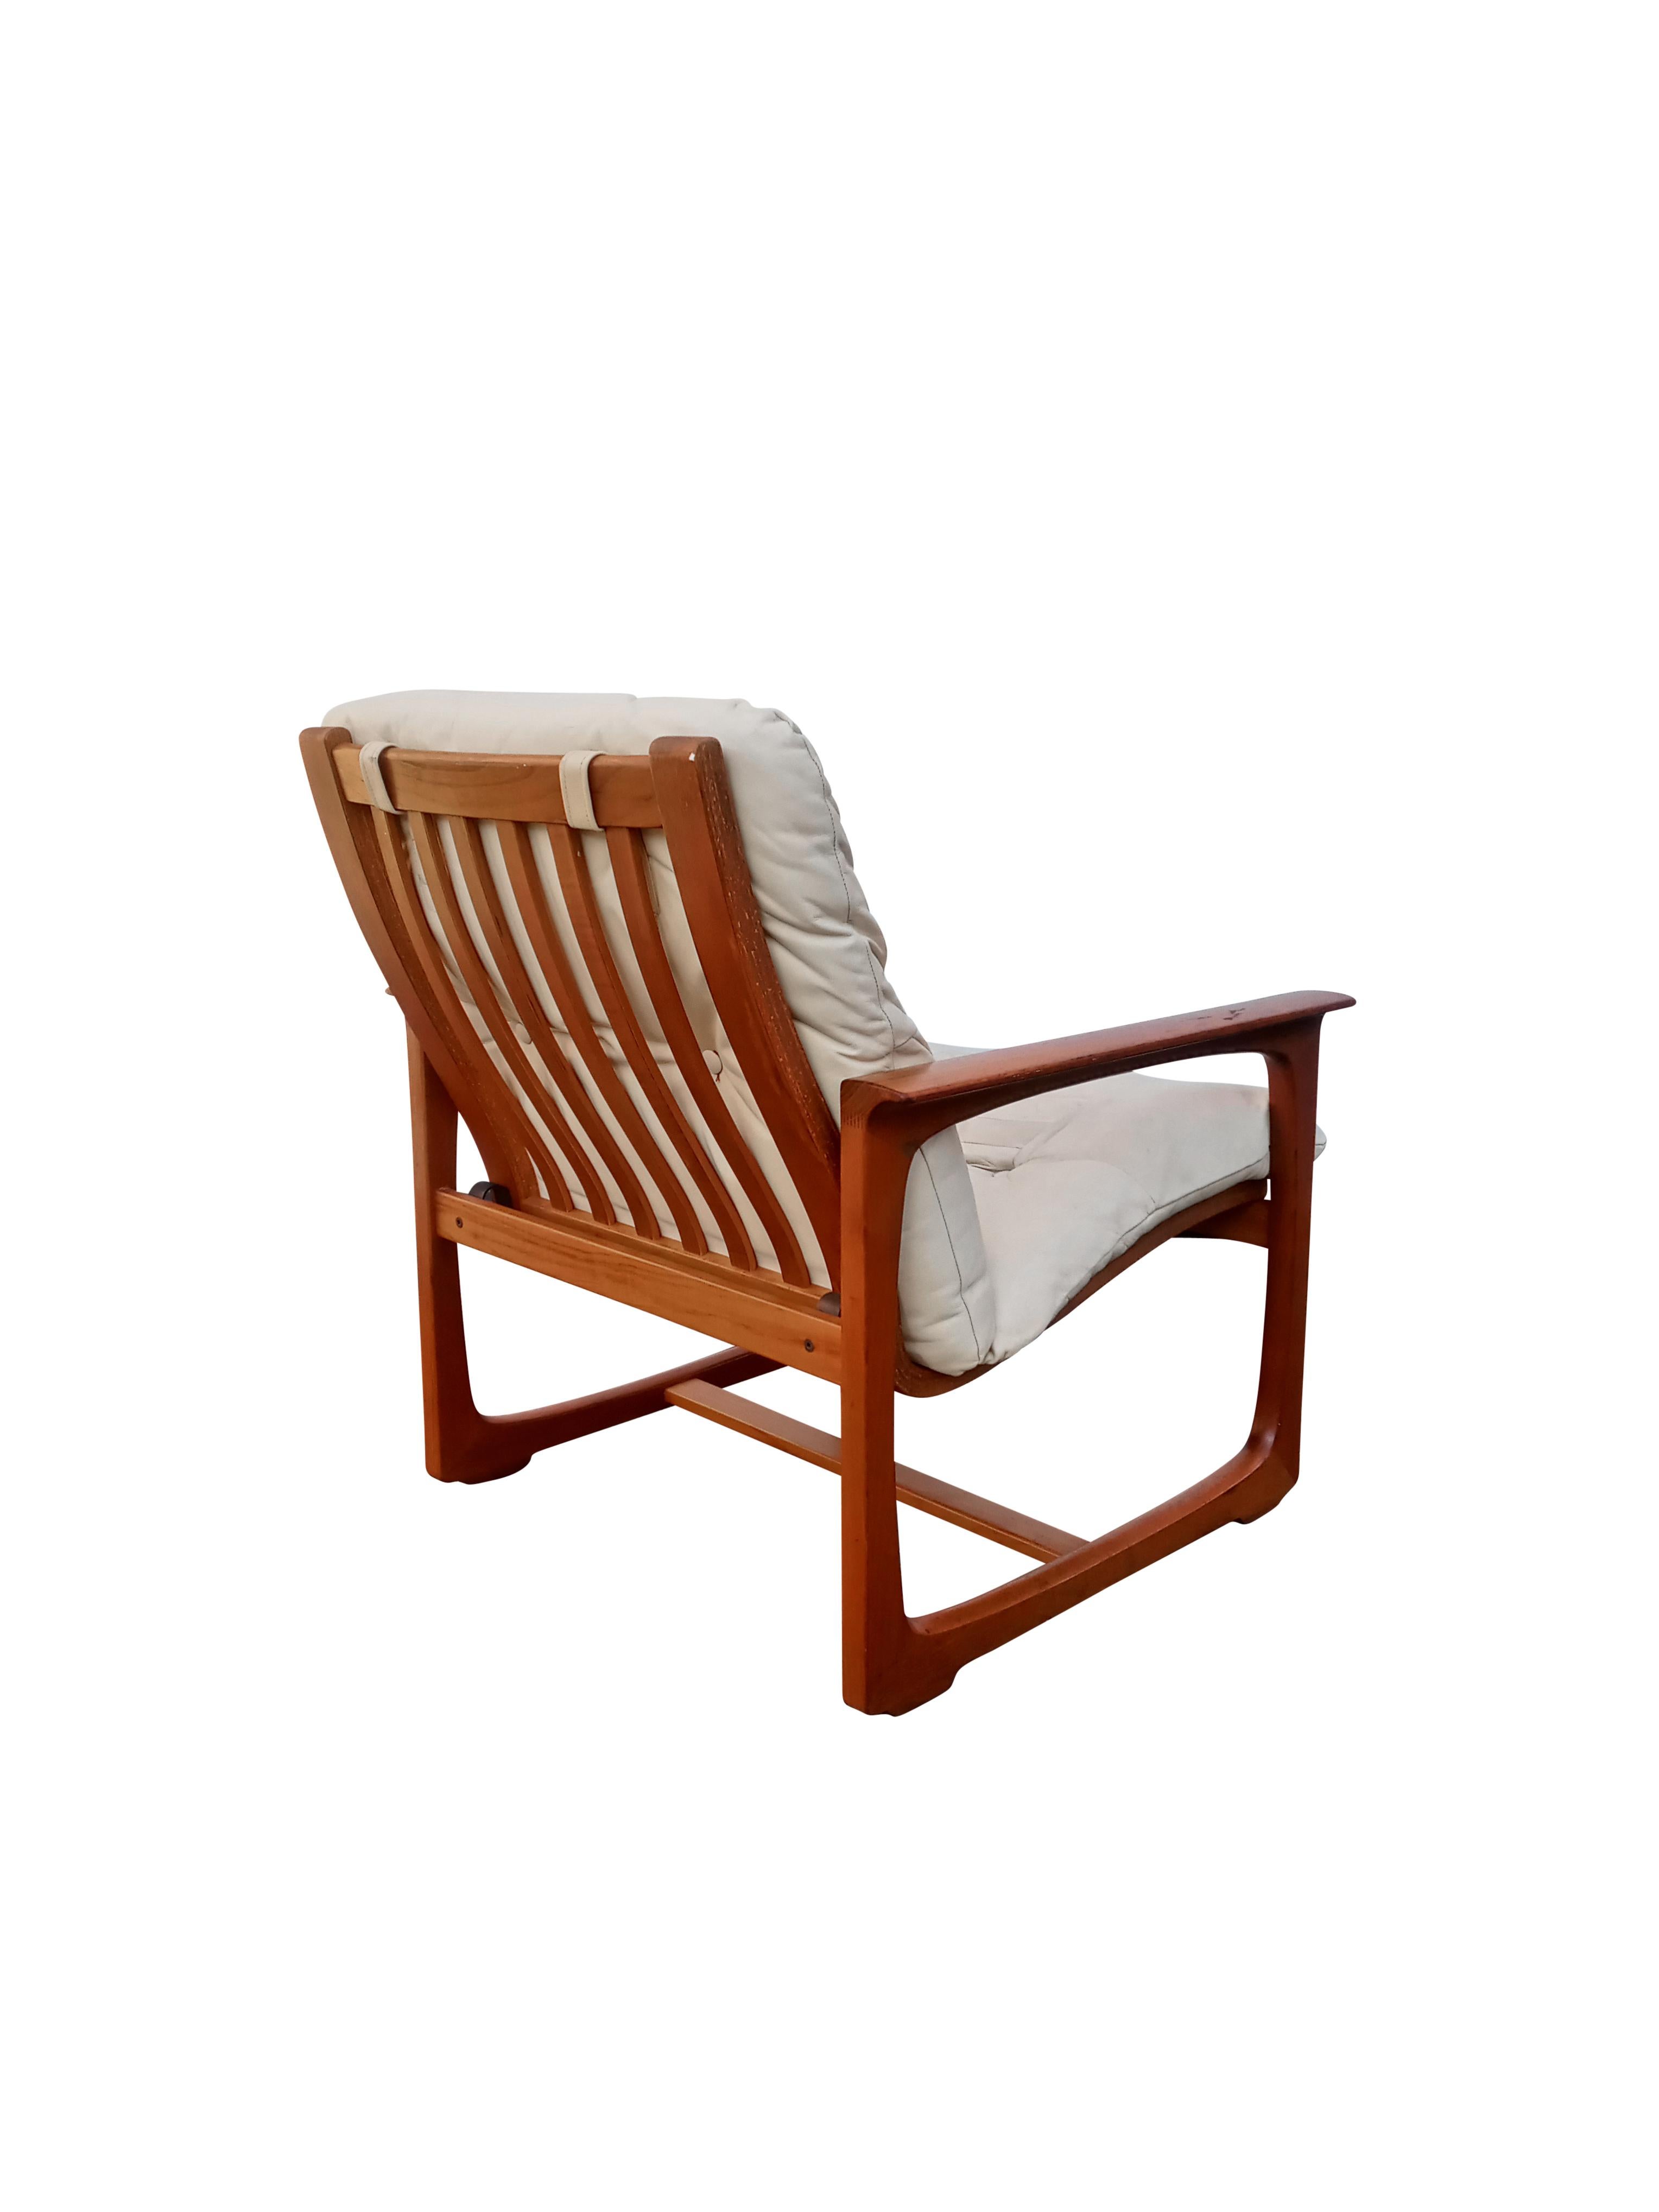 Mid-Century Modern 1970s Scandinavian Pair Lounge Chairs, Lied Mobler Norway, Teak & Leather For Sale